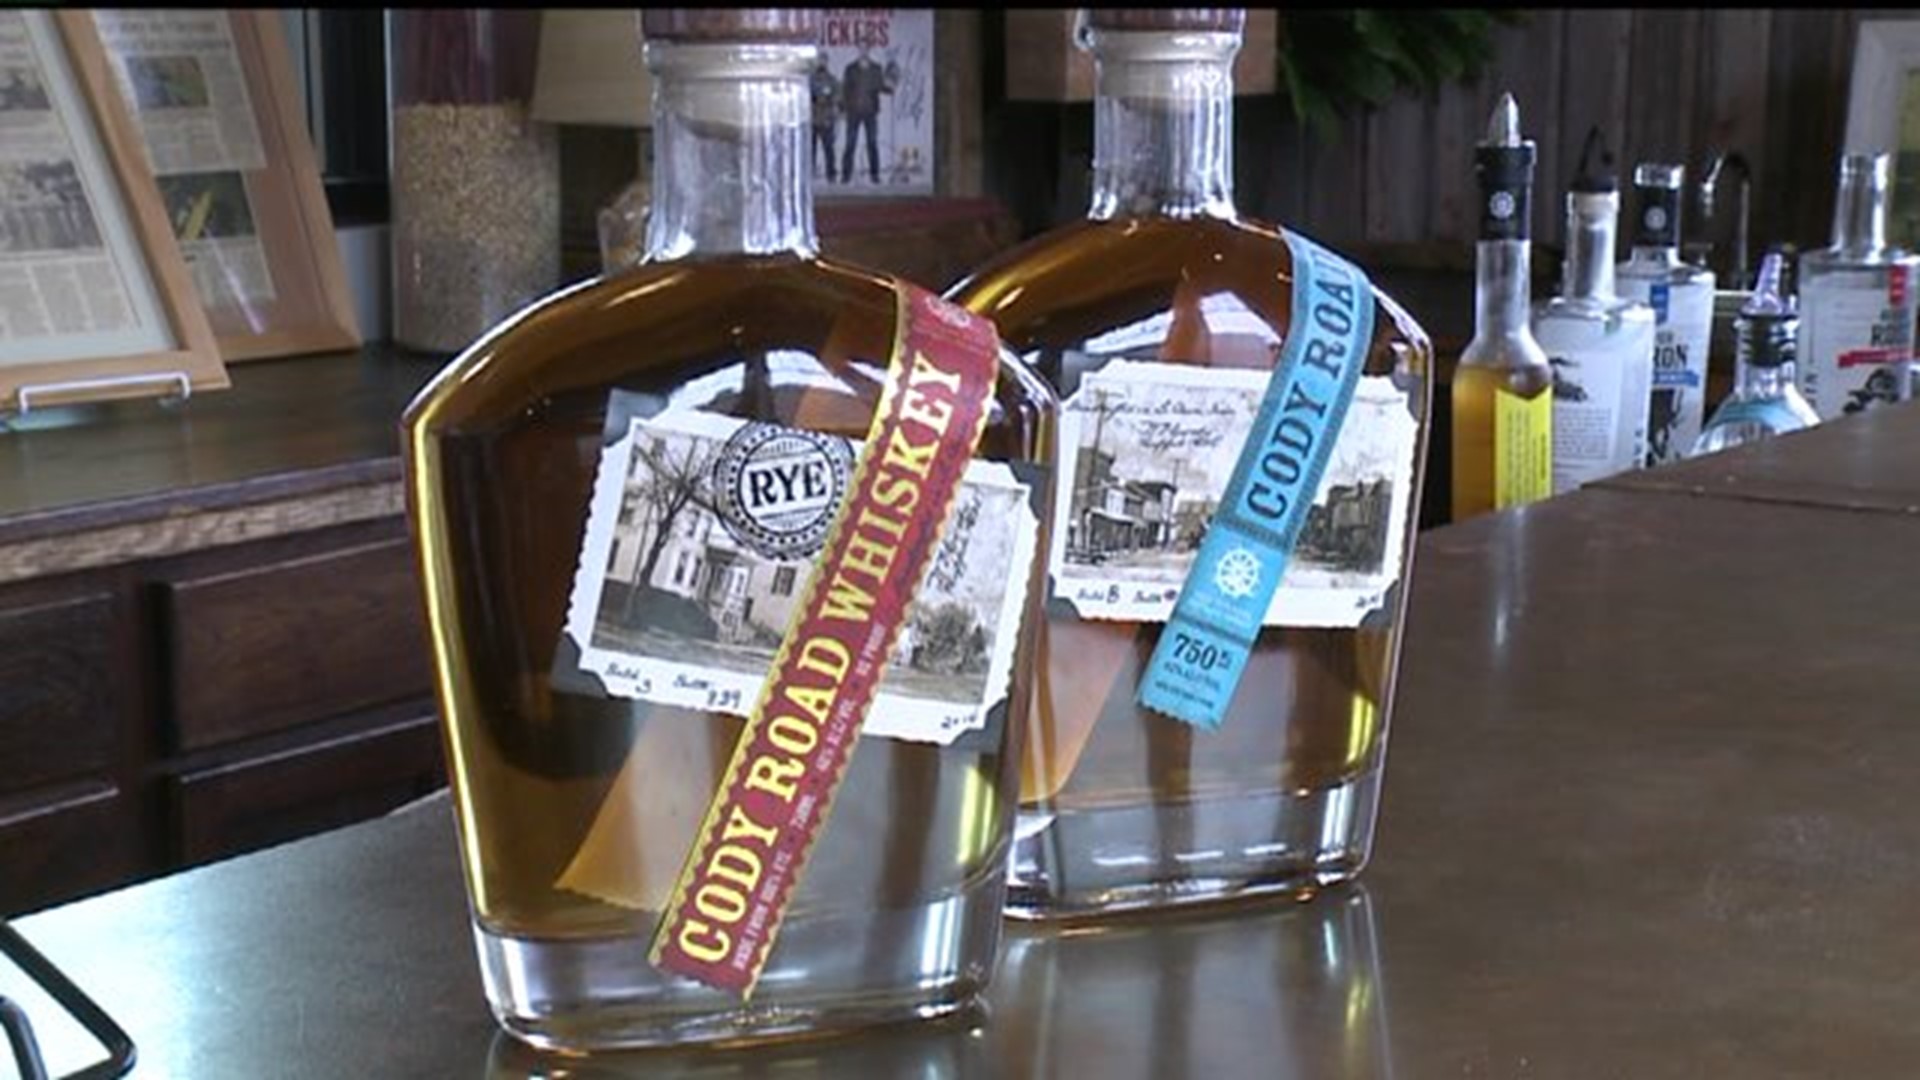 LeClaire whiskey company not part of the shortage